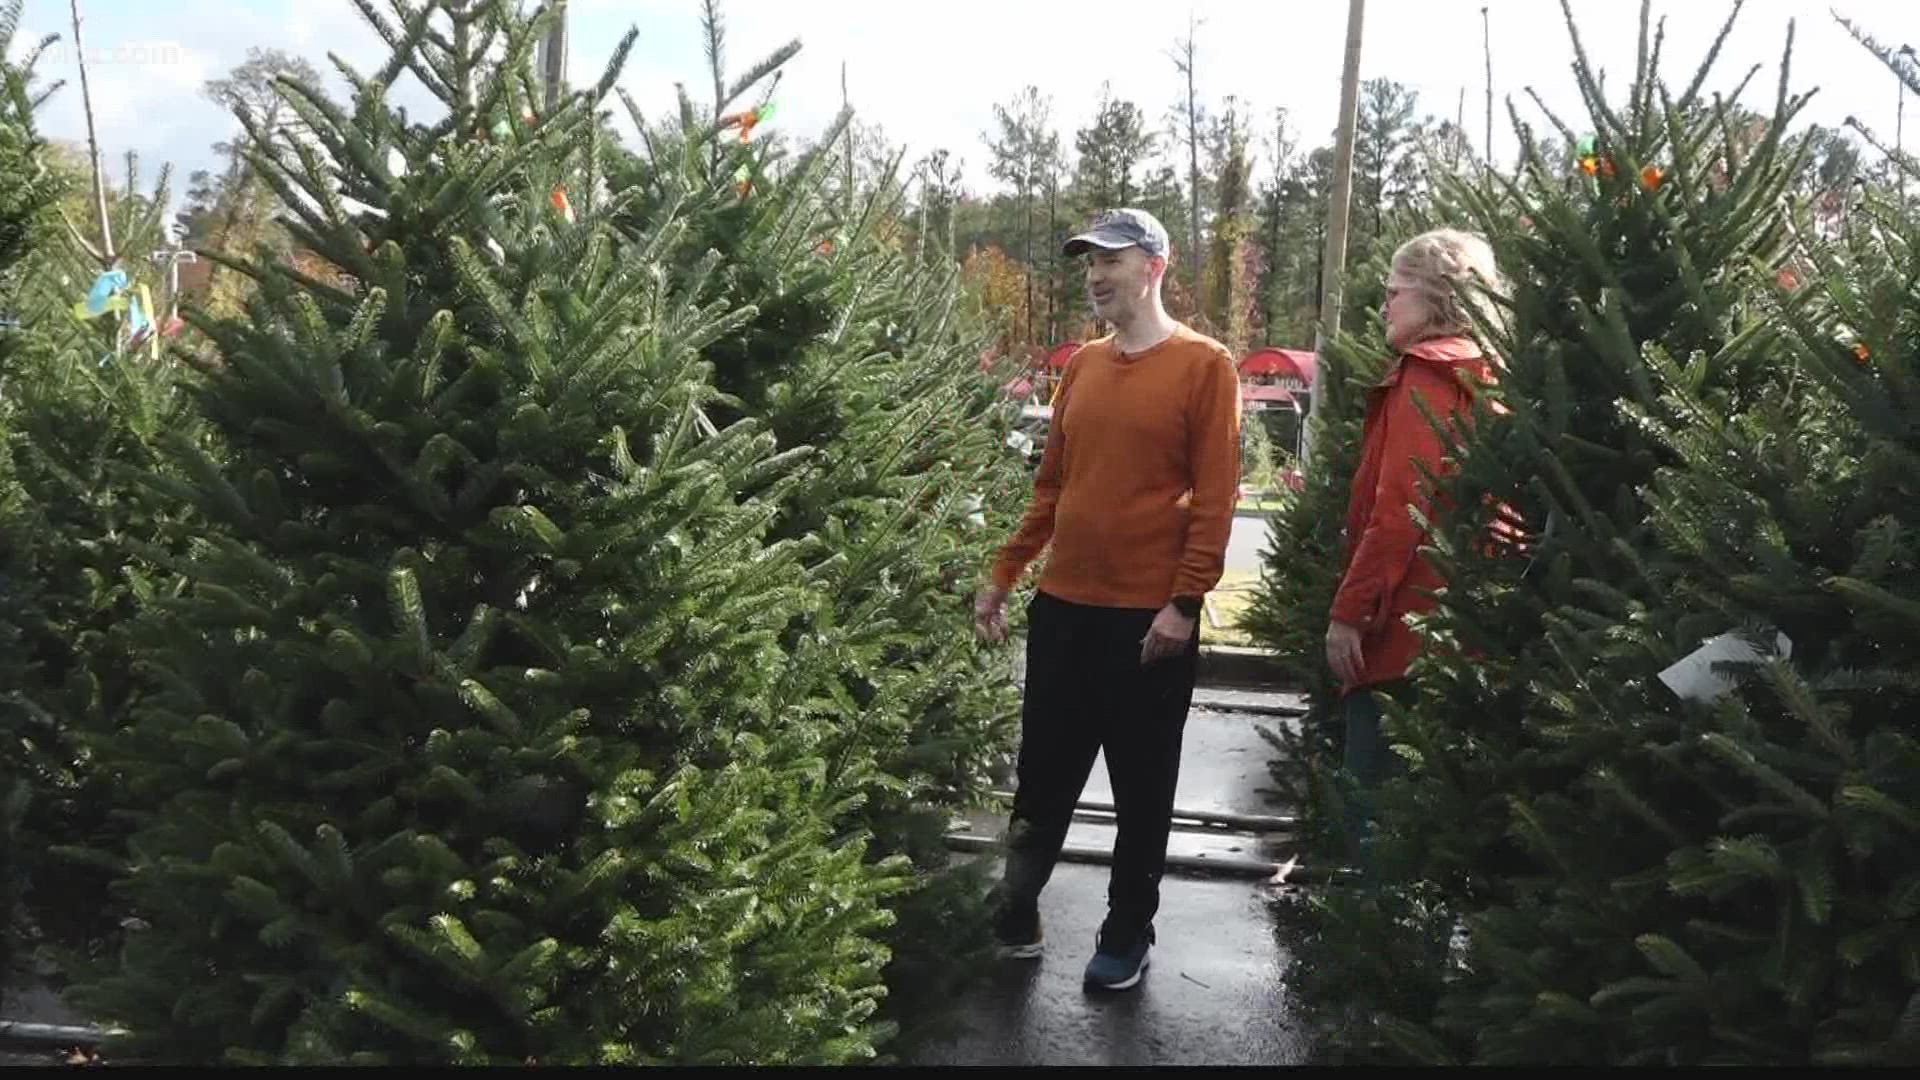 Live tree shoppers are noticing inflation impacting yet another item.